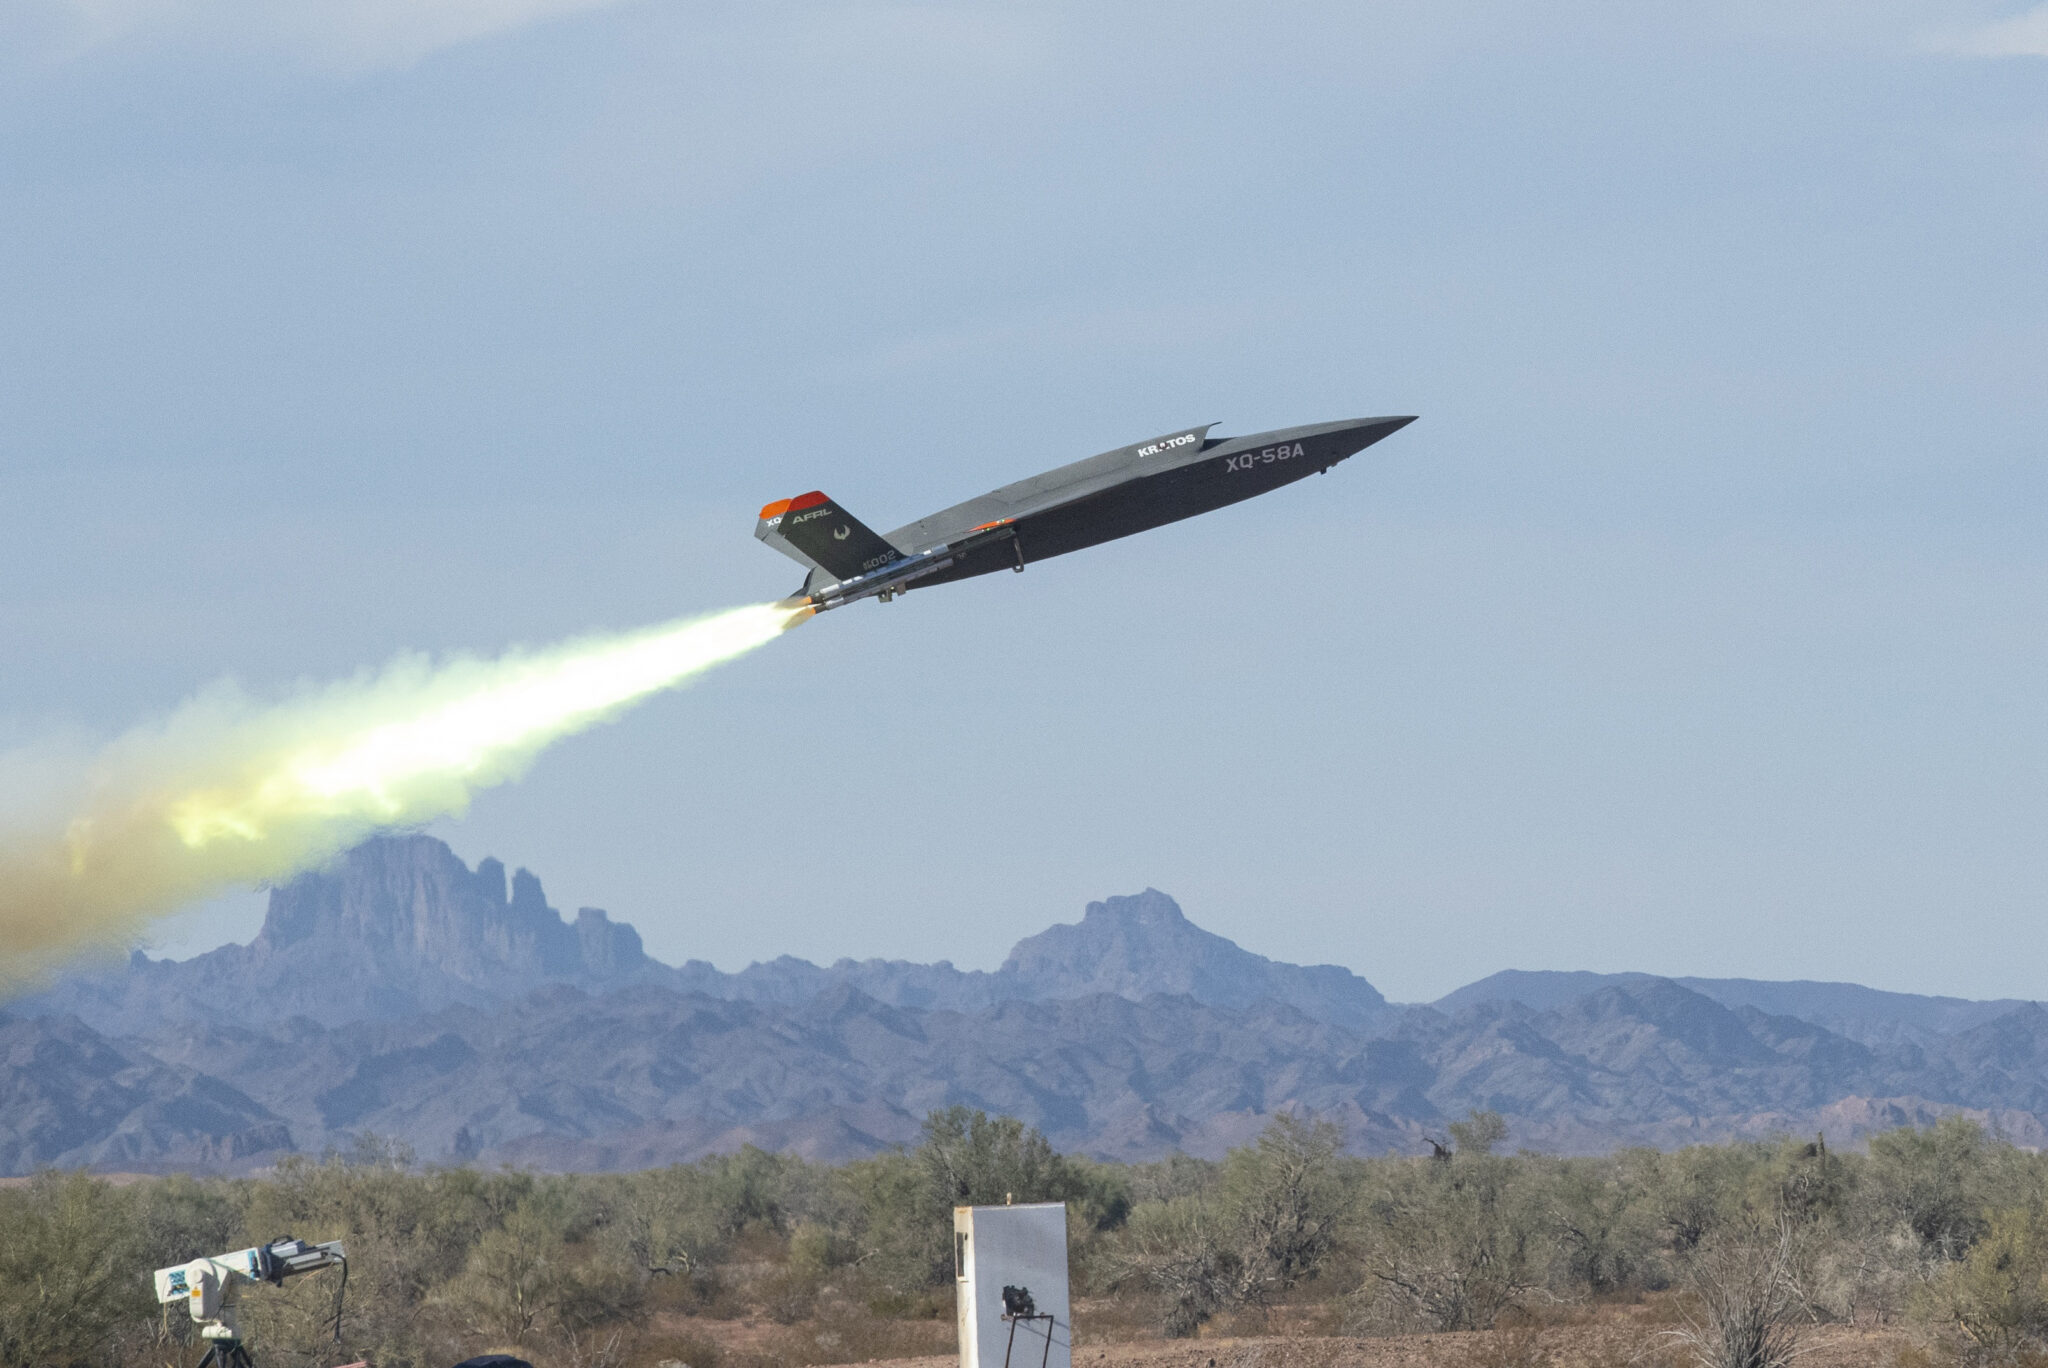 The U.S. Navy will receive $15.5 million worth of XQ-58A Valkyrie combat drones